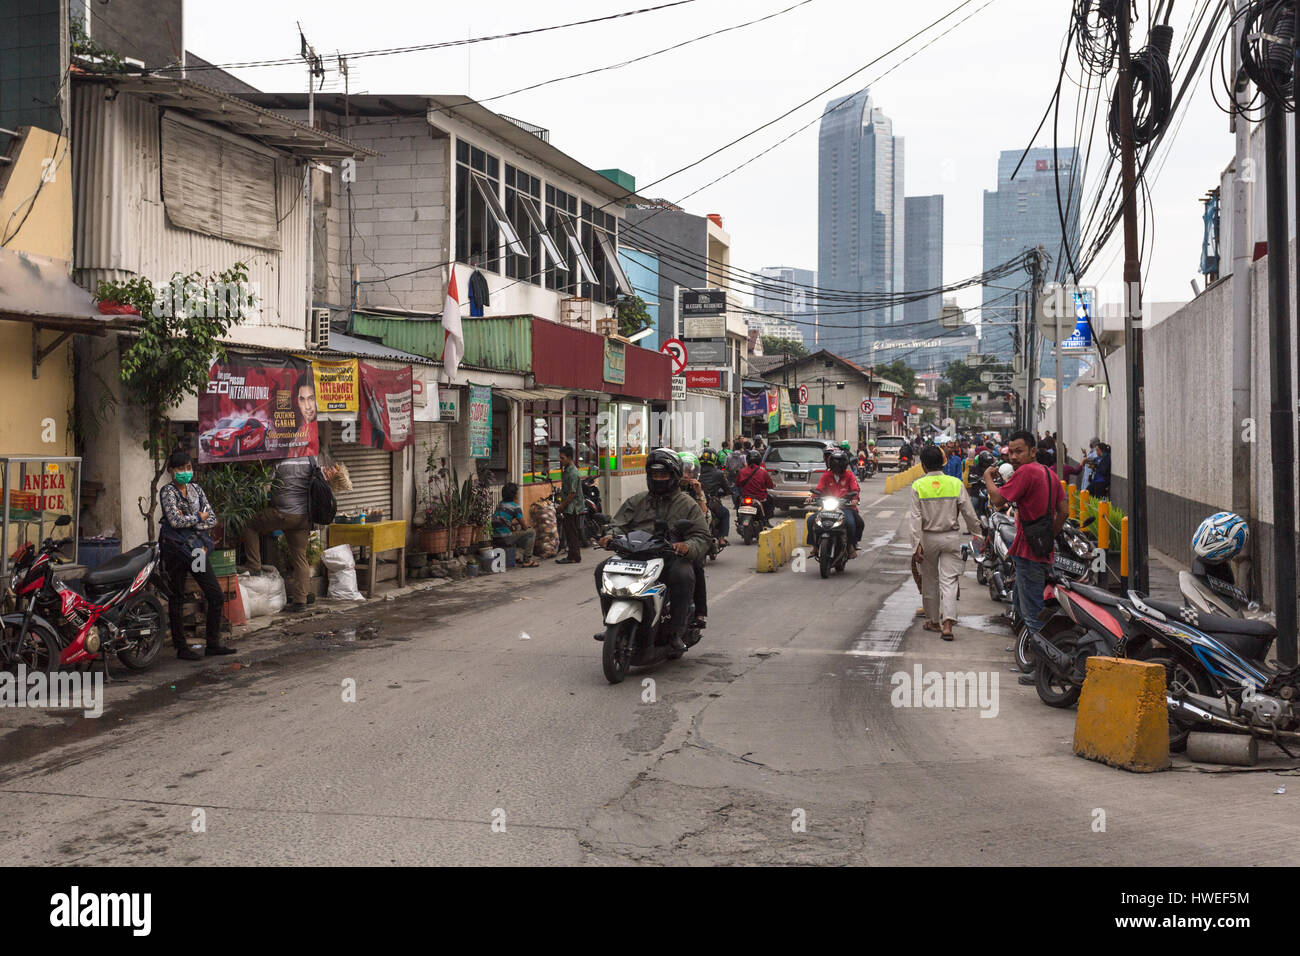 JAKARTA, INDONESIA - JANUARY 27, 2017: Local street contrasts with the tall modern office buildings in Jakarta downtown where life is still organized  Stock Photo